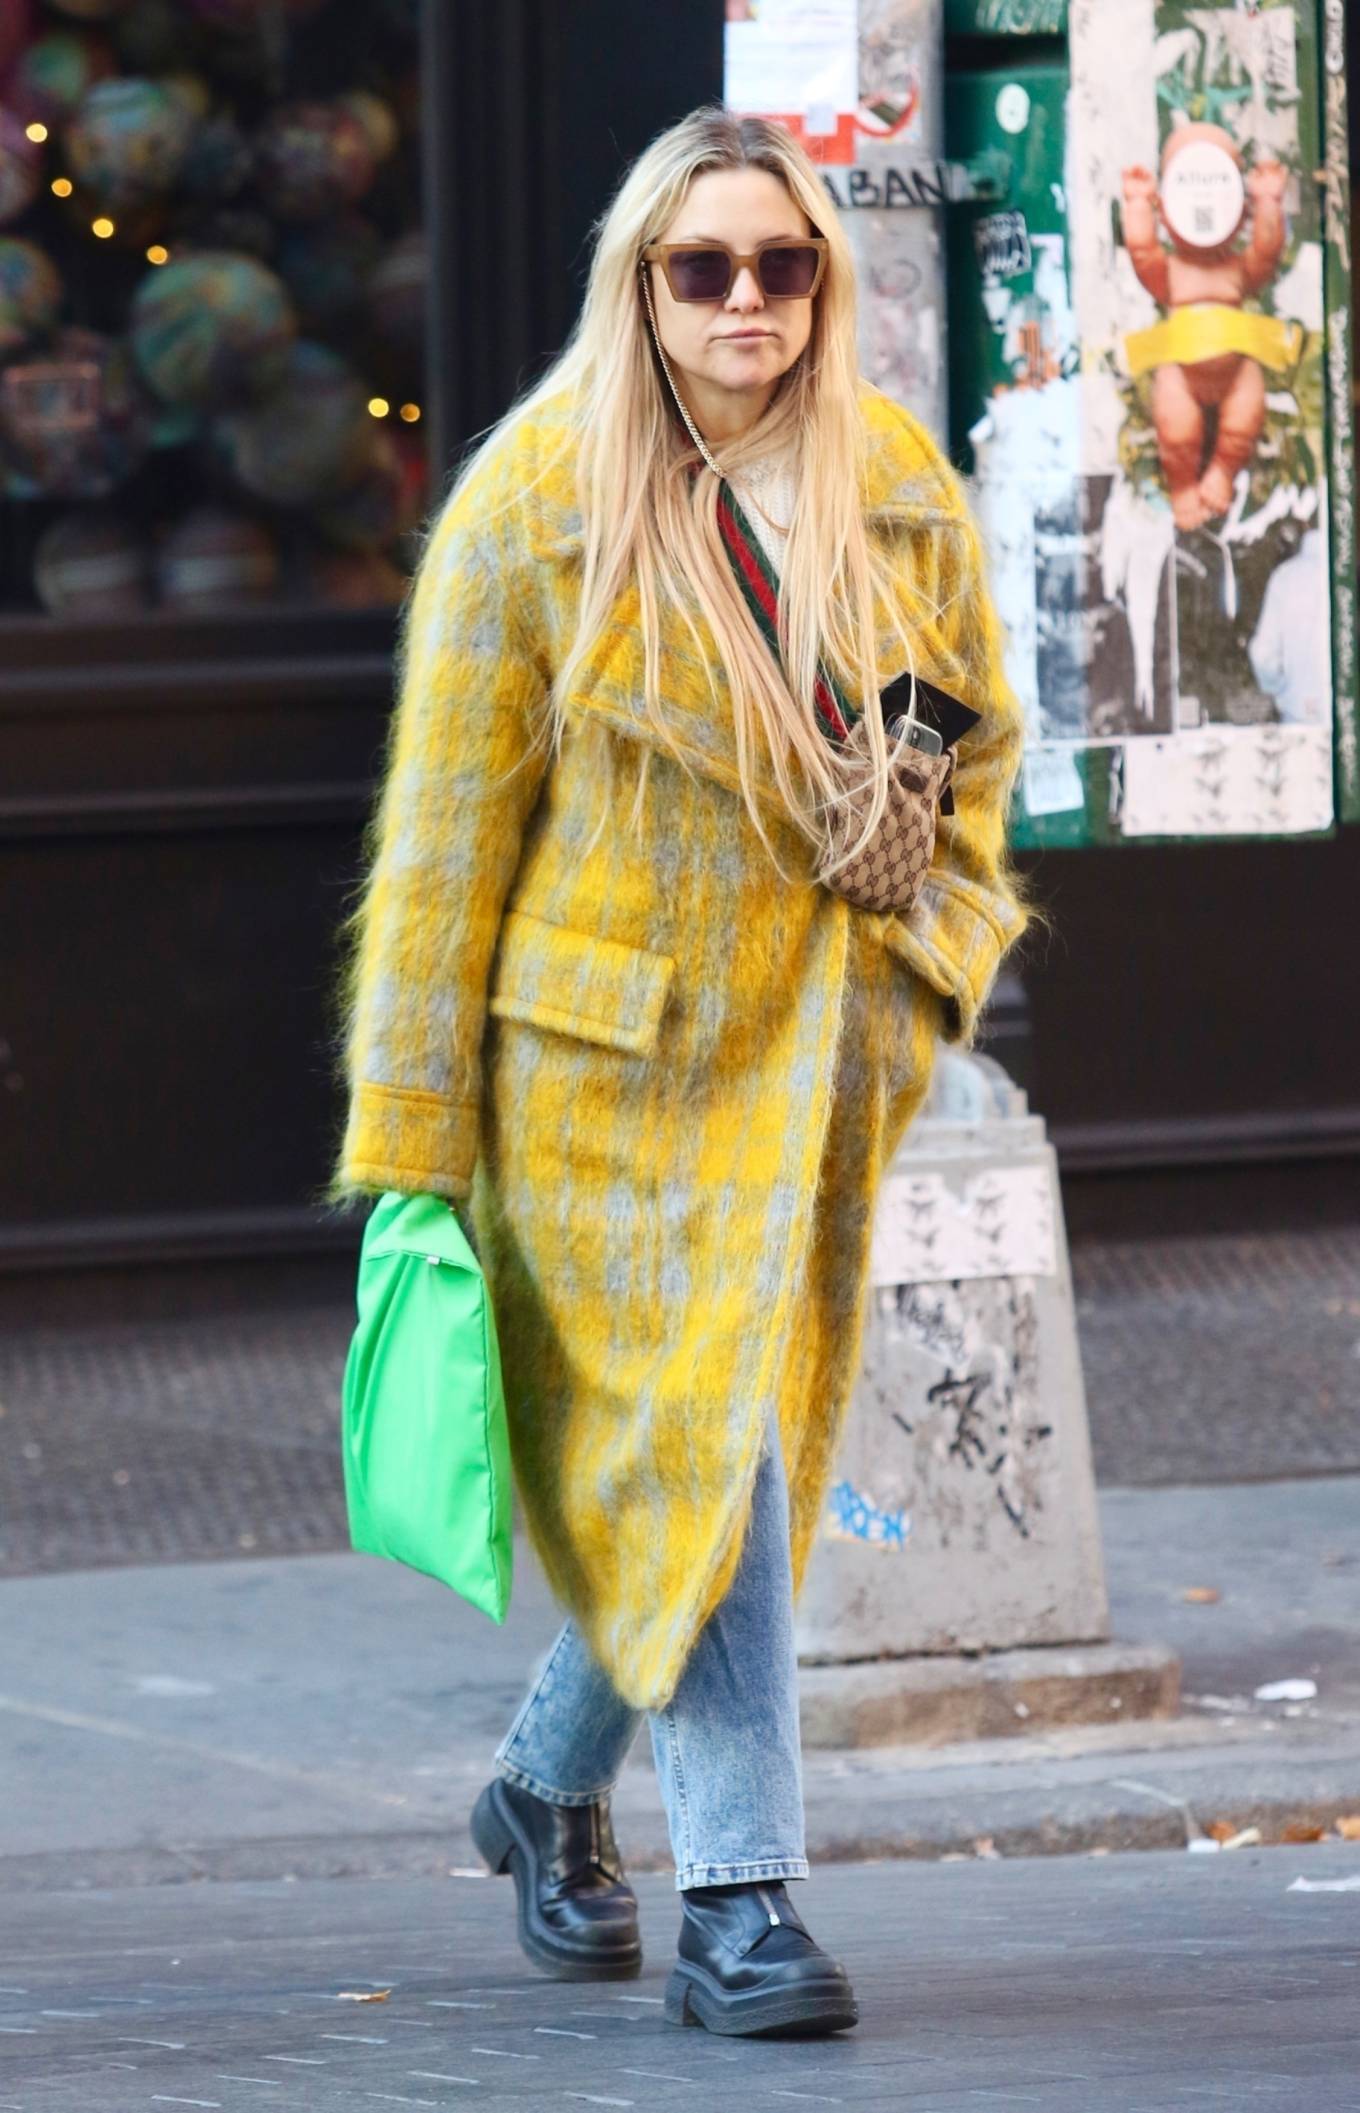 Kate Hudson - Wear yellow coat while braving the cold weather in NYC